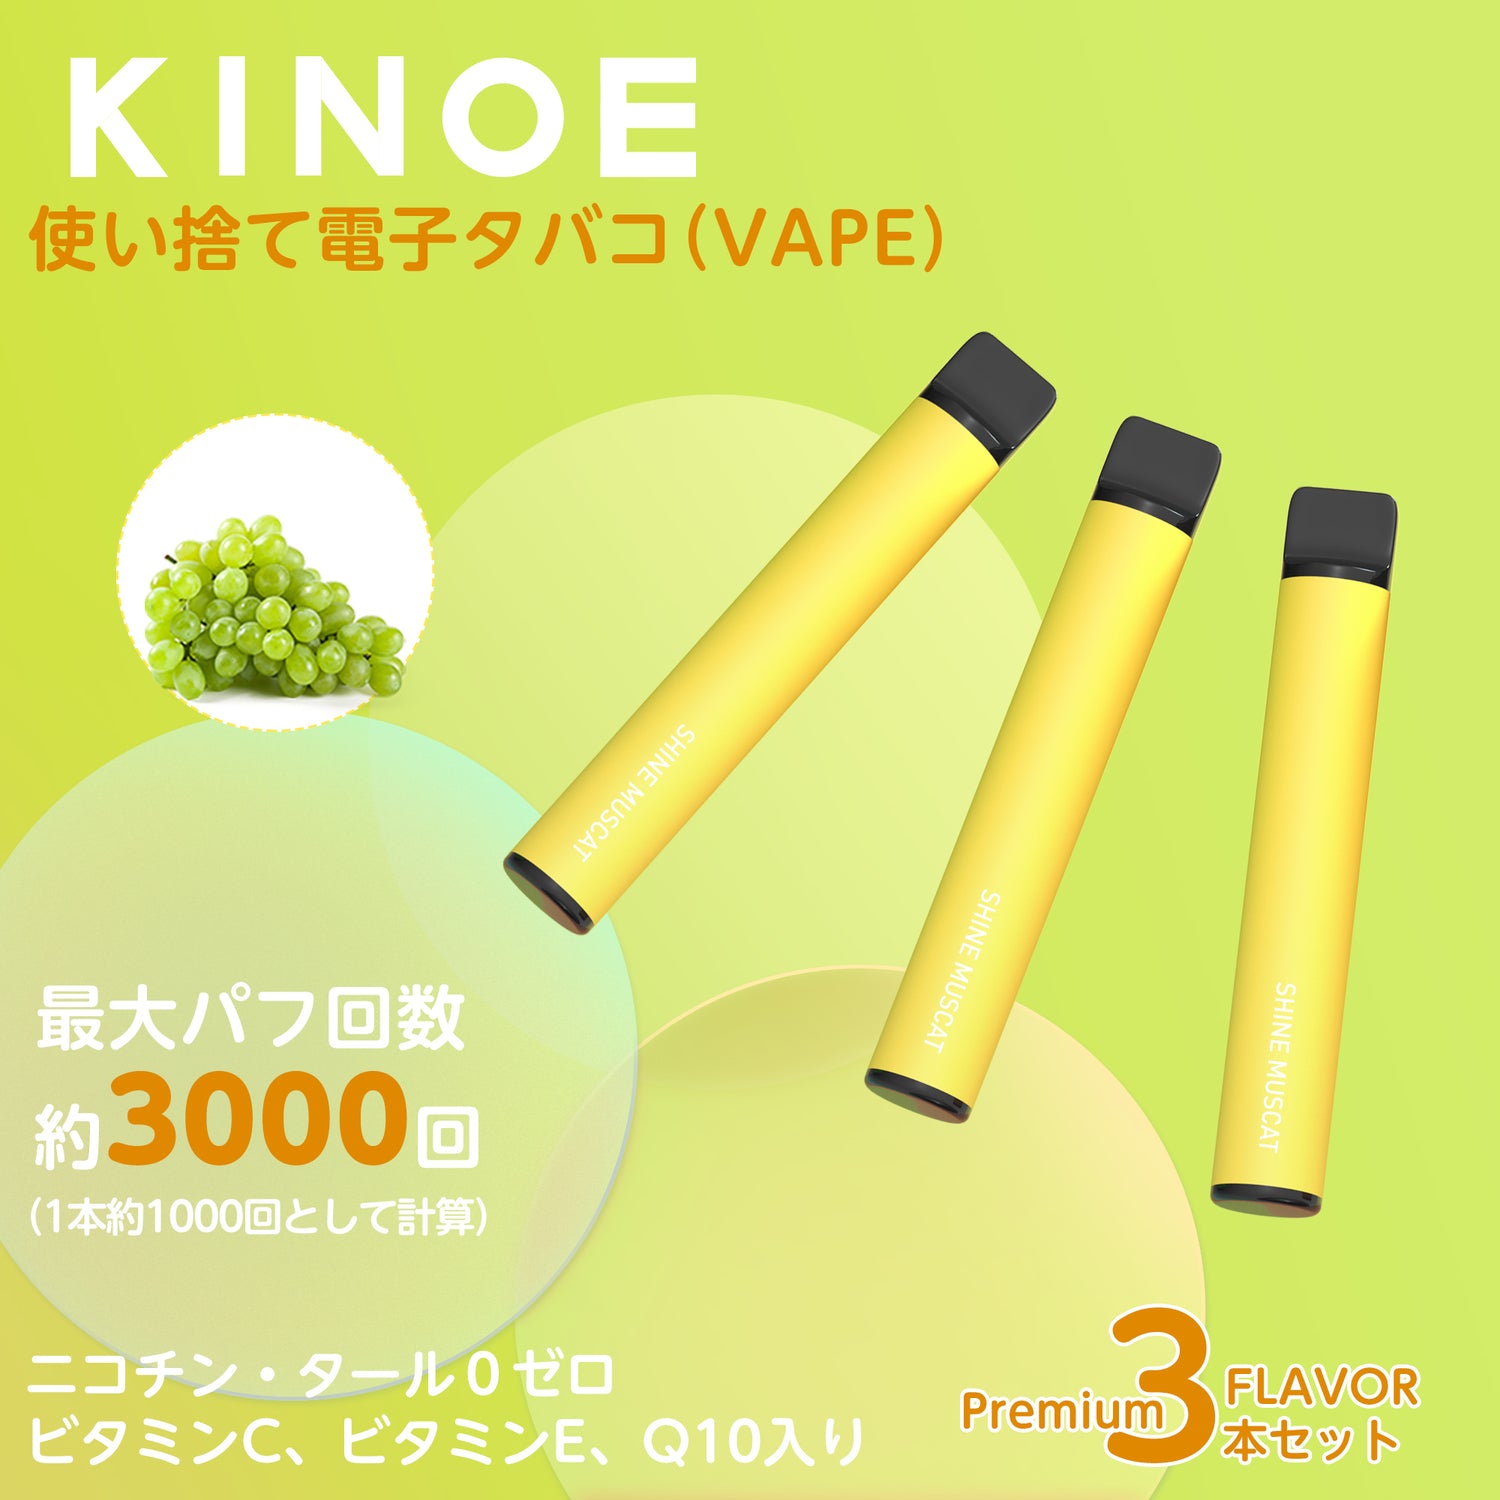 KINOE Electronic Cigarette, Disposable, Approximately 1000 times/can be inhaled, Explosive Smoke, Large Capacity, Steam Cigarette (Shine Muscat)